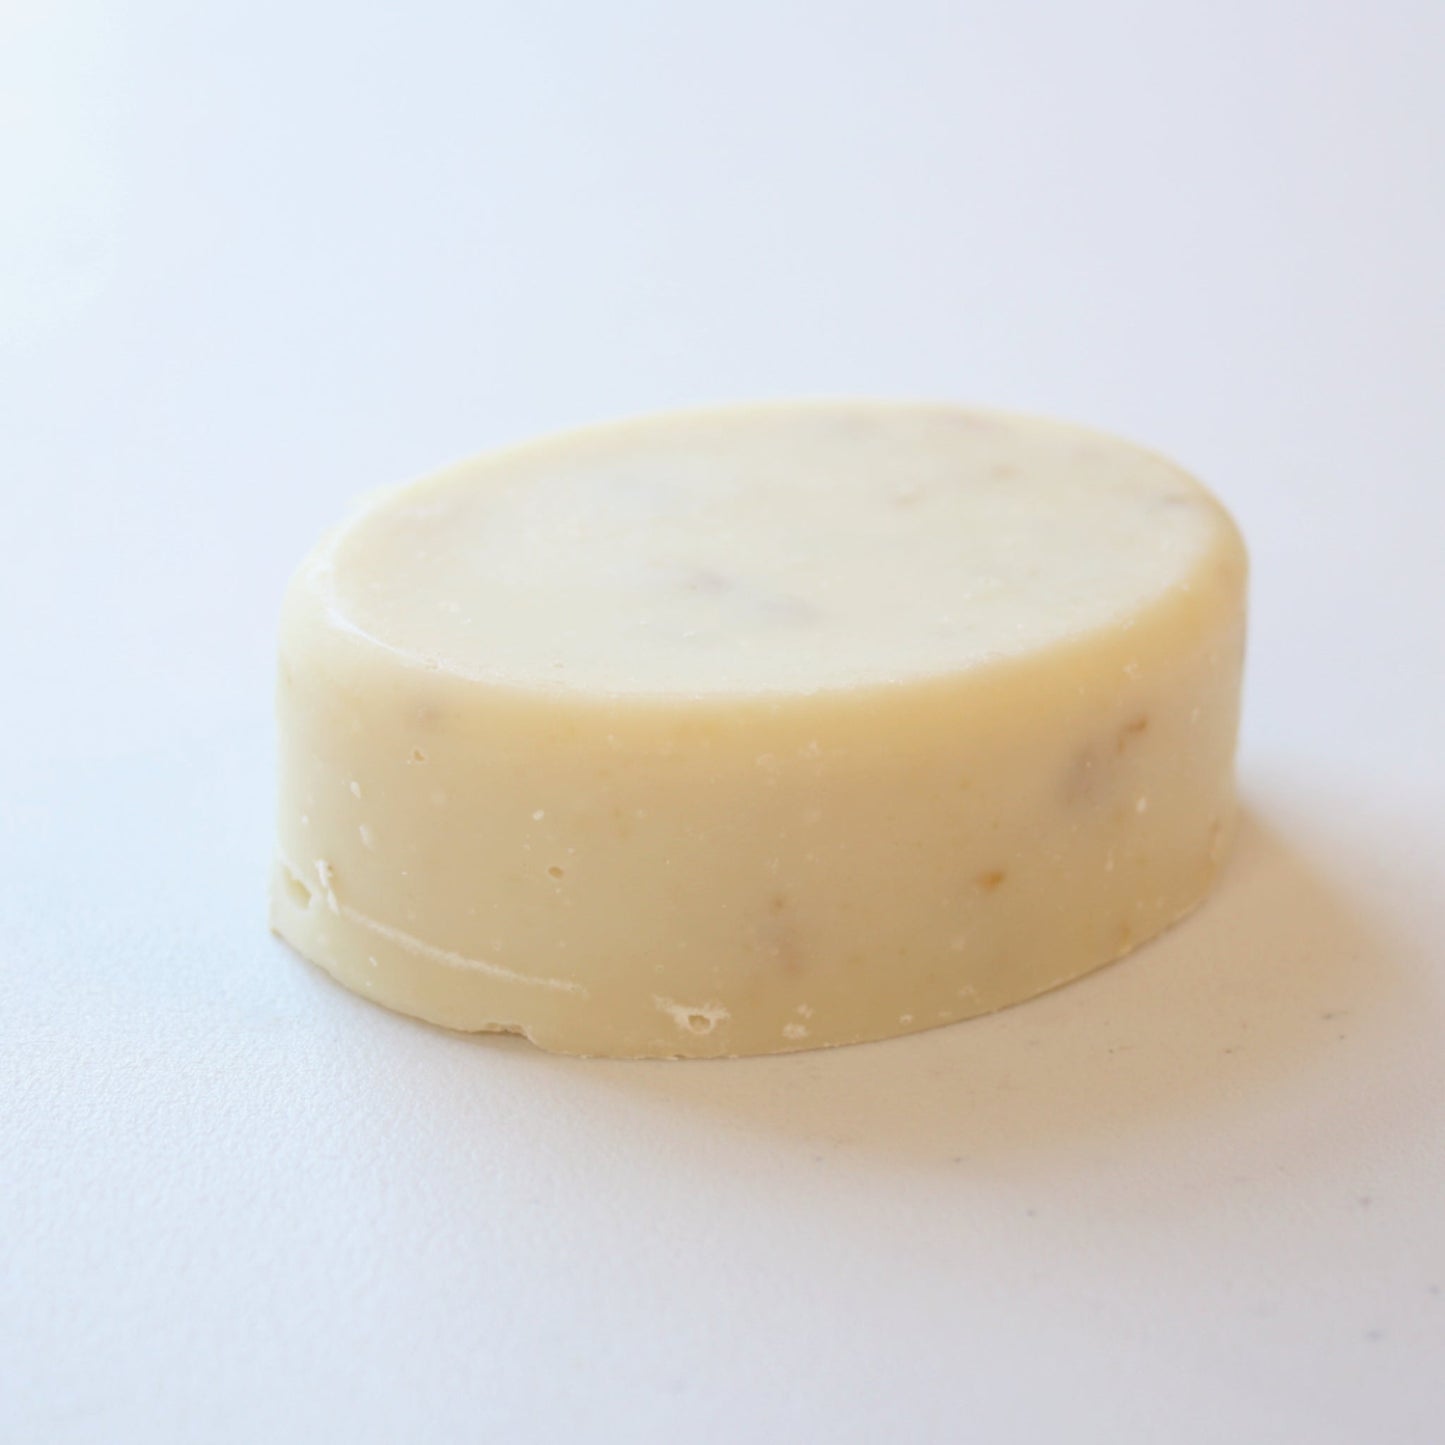 Traditional Goat Milk Soap with Oats - Lavender or Unscented - Made in the USA